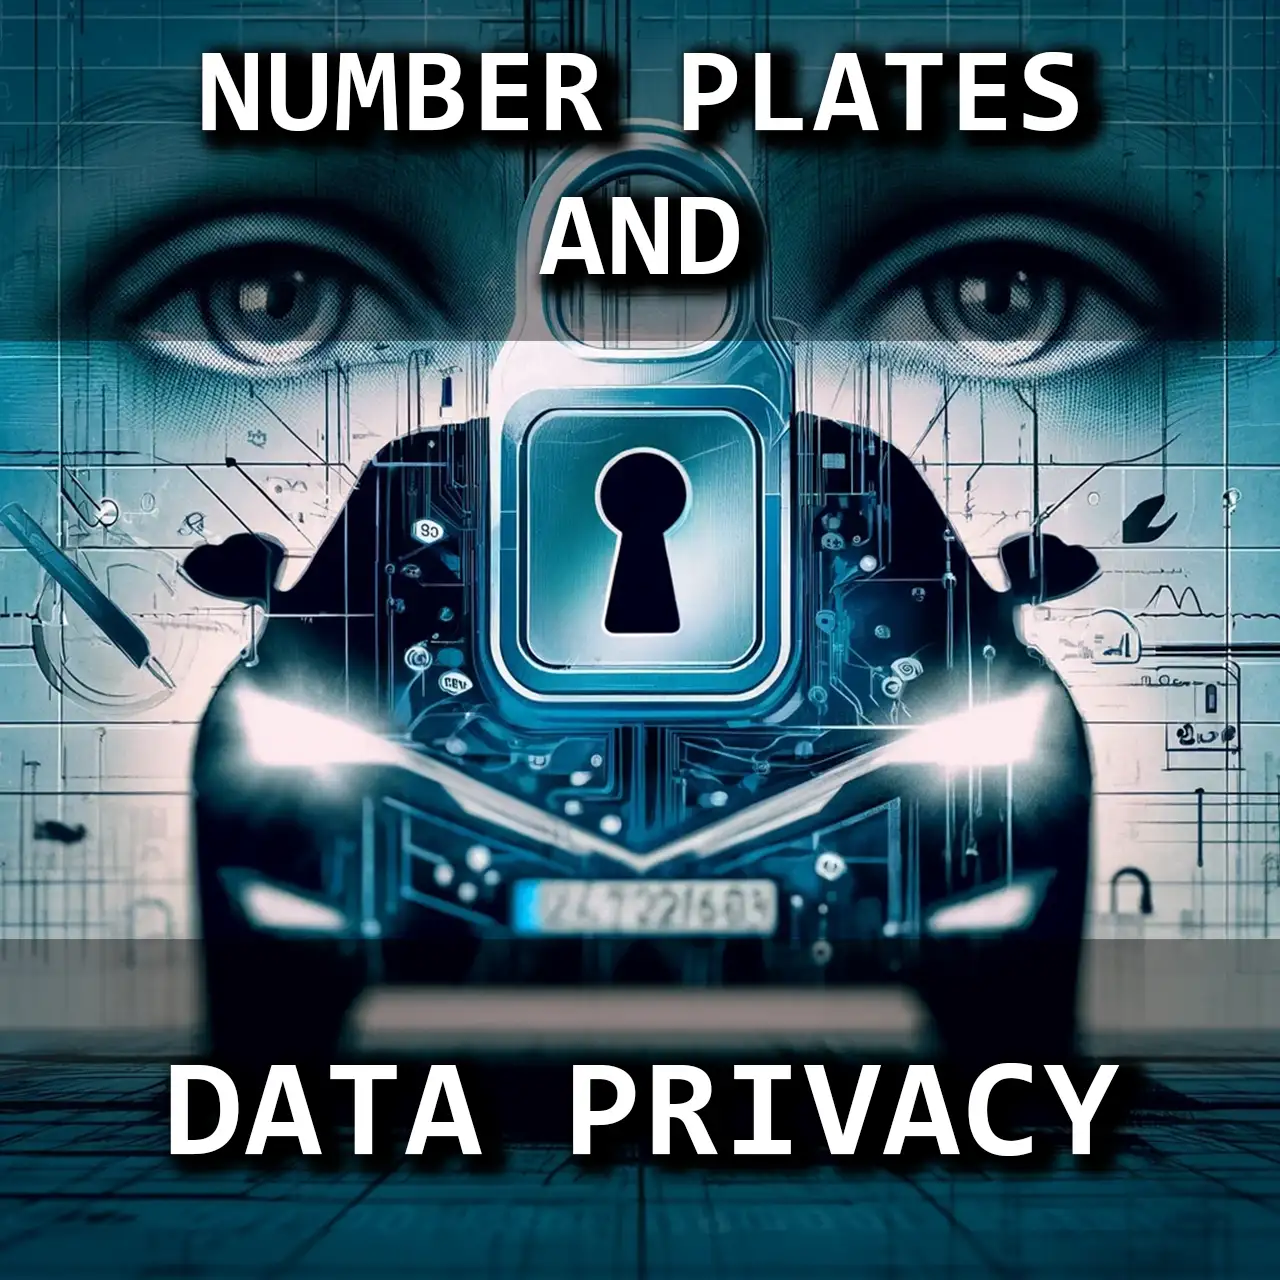 SurePlates Number Plates and Privacy Concerns How Much Information Should Be Publicly Available